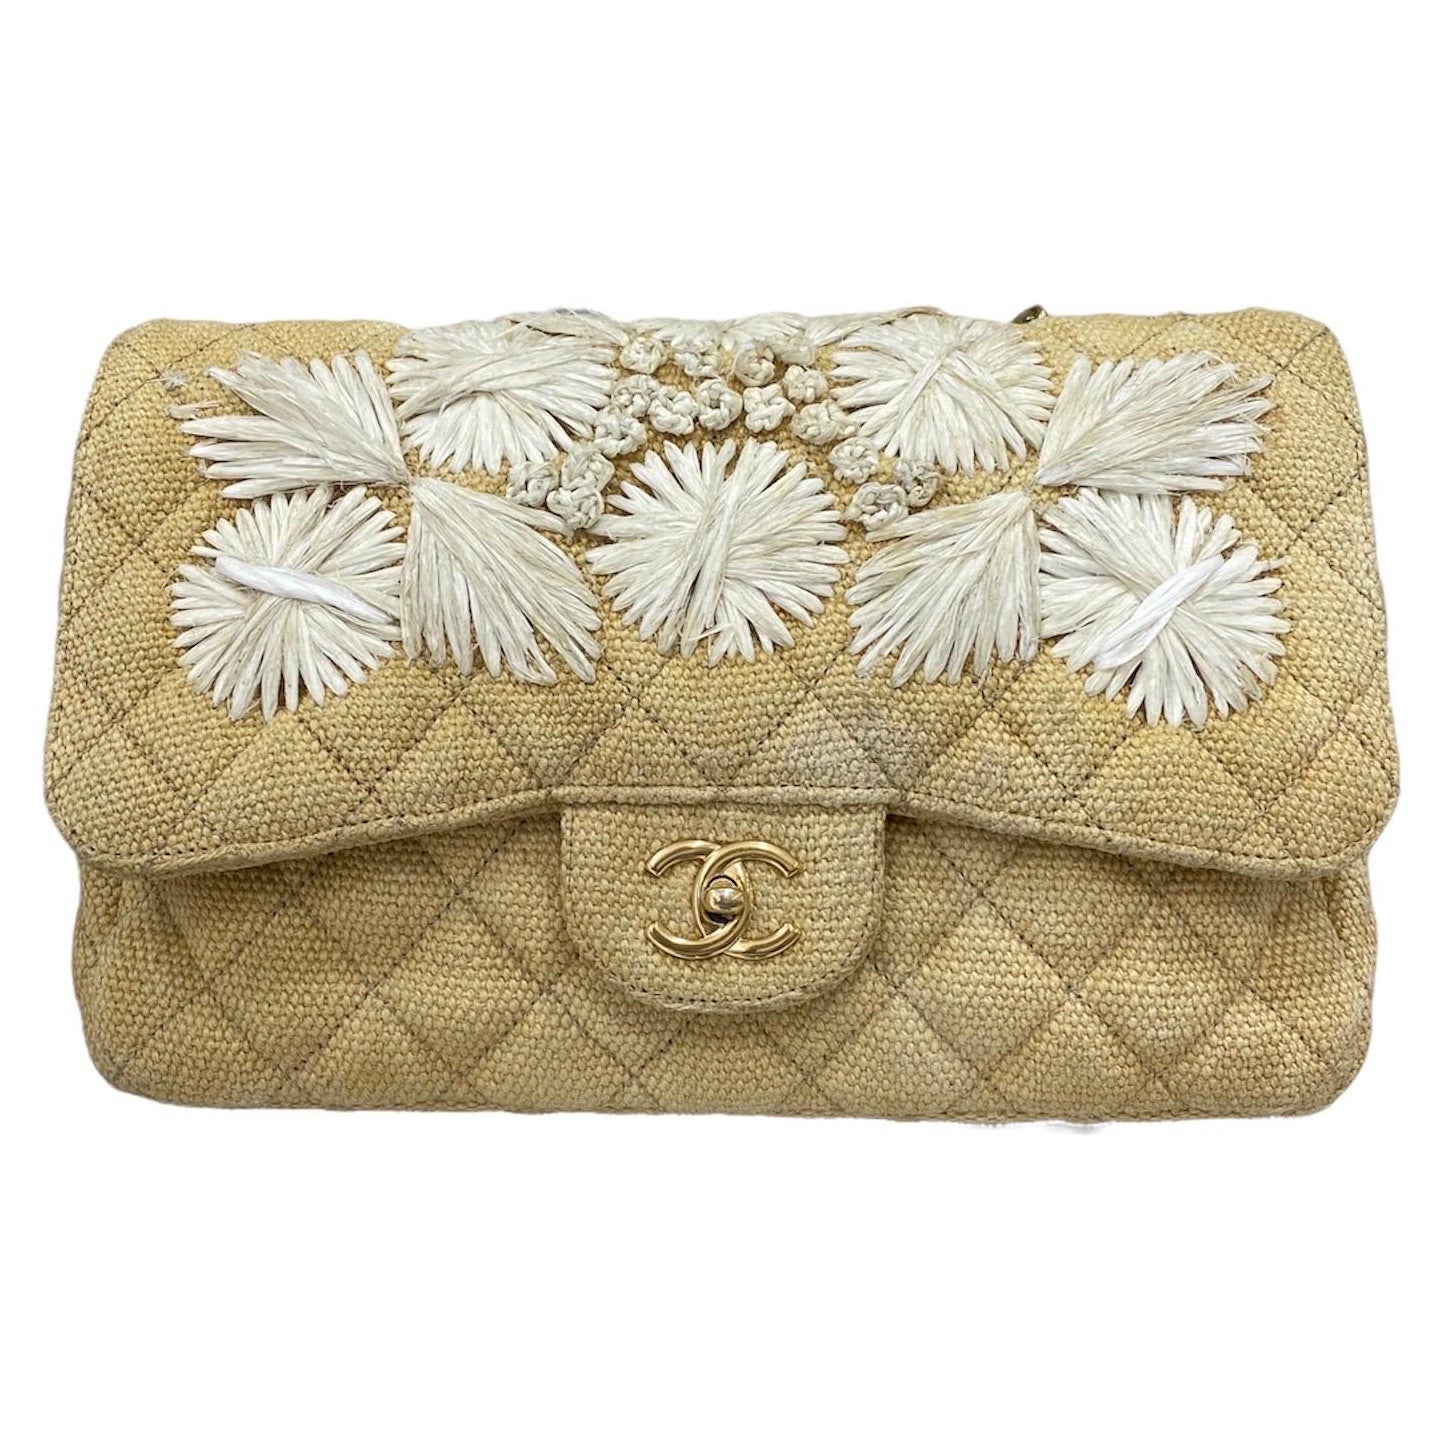 Chanel Flap Beige Canvas Flowers Borsa a Tracolla For Sale